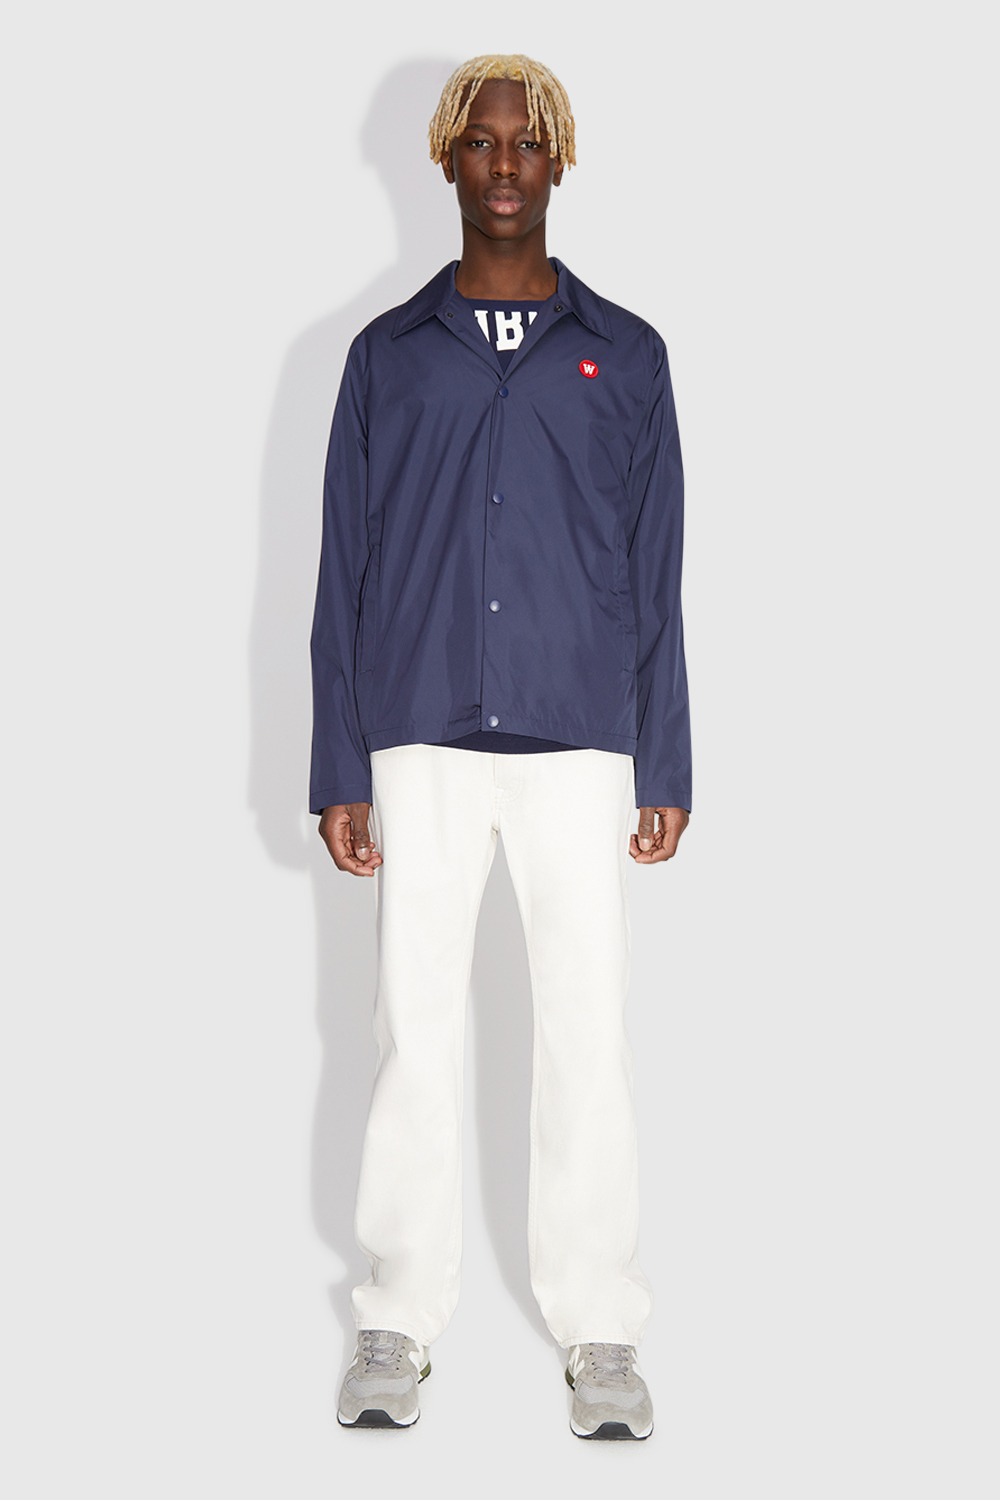 Double A by Wood Wood Ali coach jacket Navy | WoodWood.com